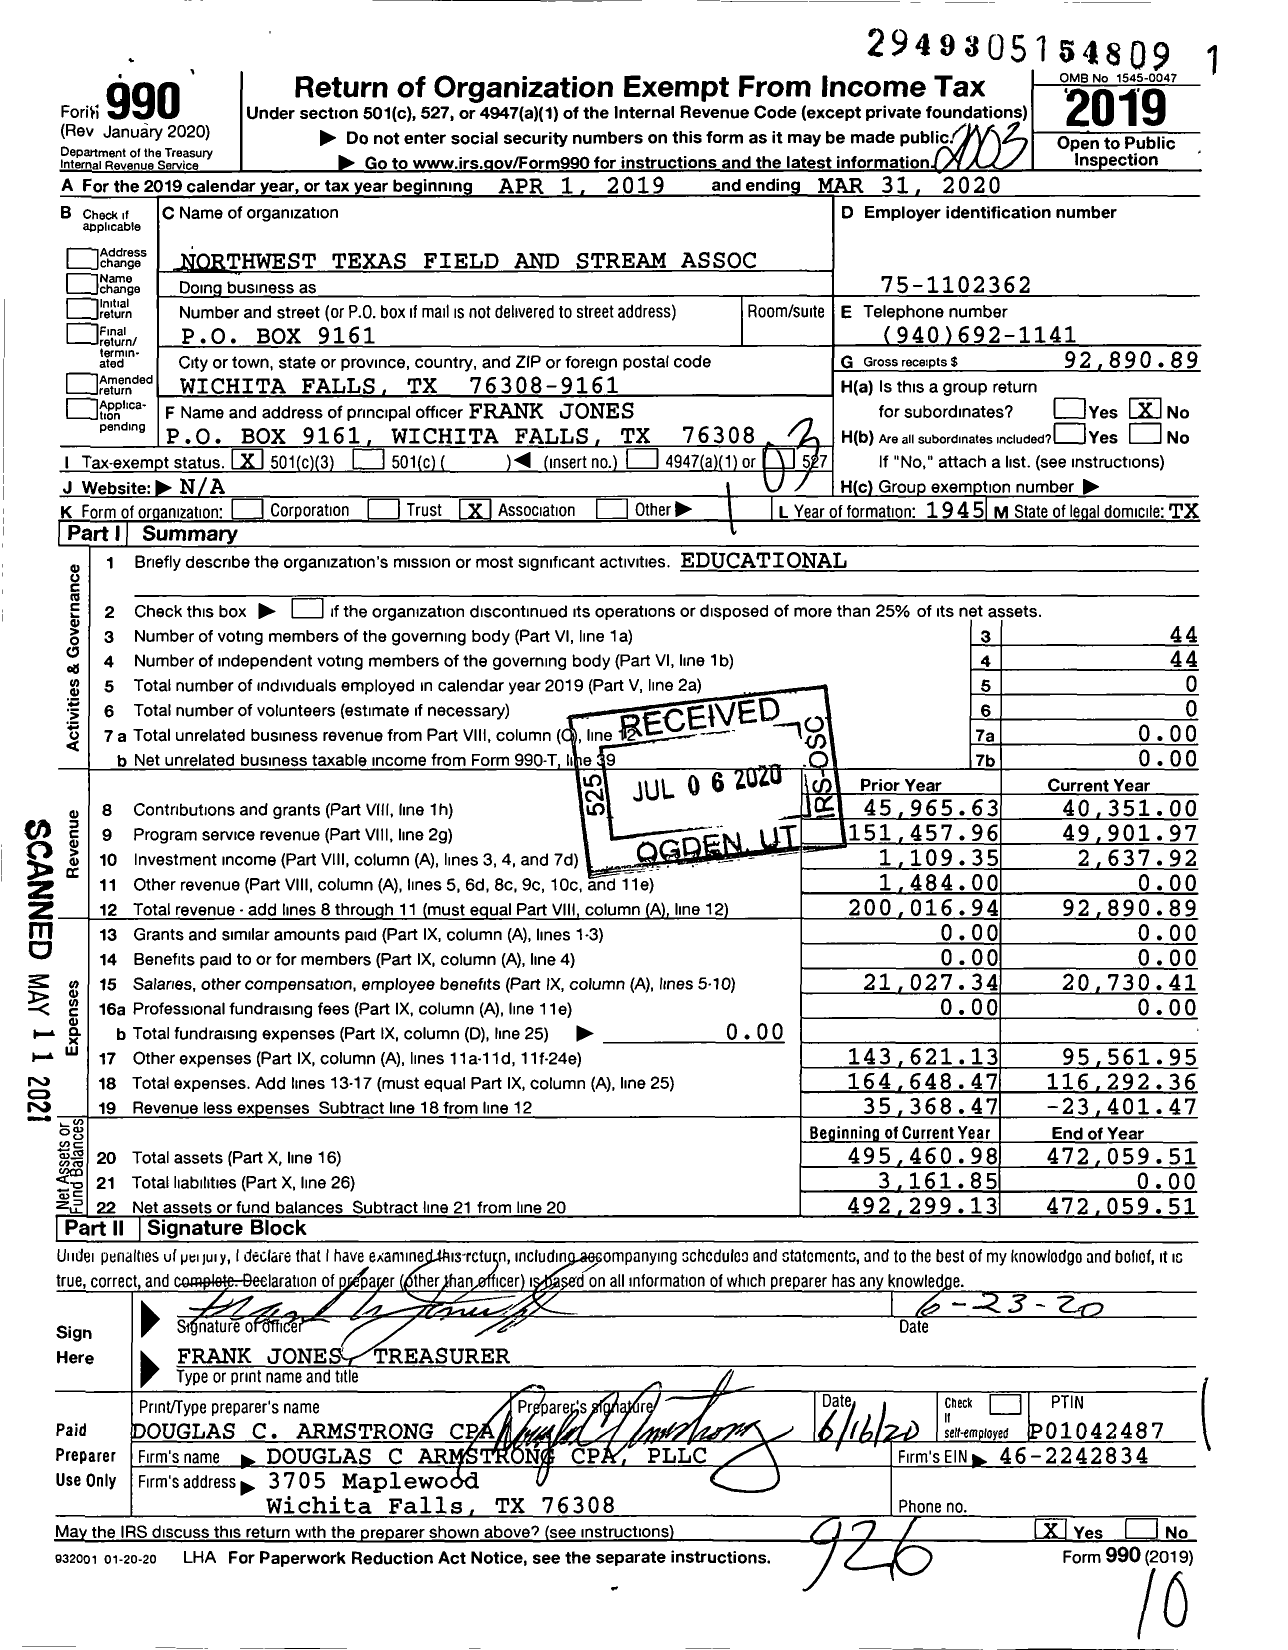 Image of first page of 2019 Form 990 for Northwest Texas Field and Stream Association